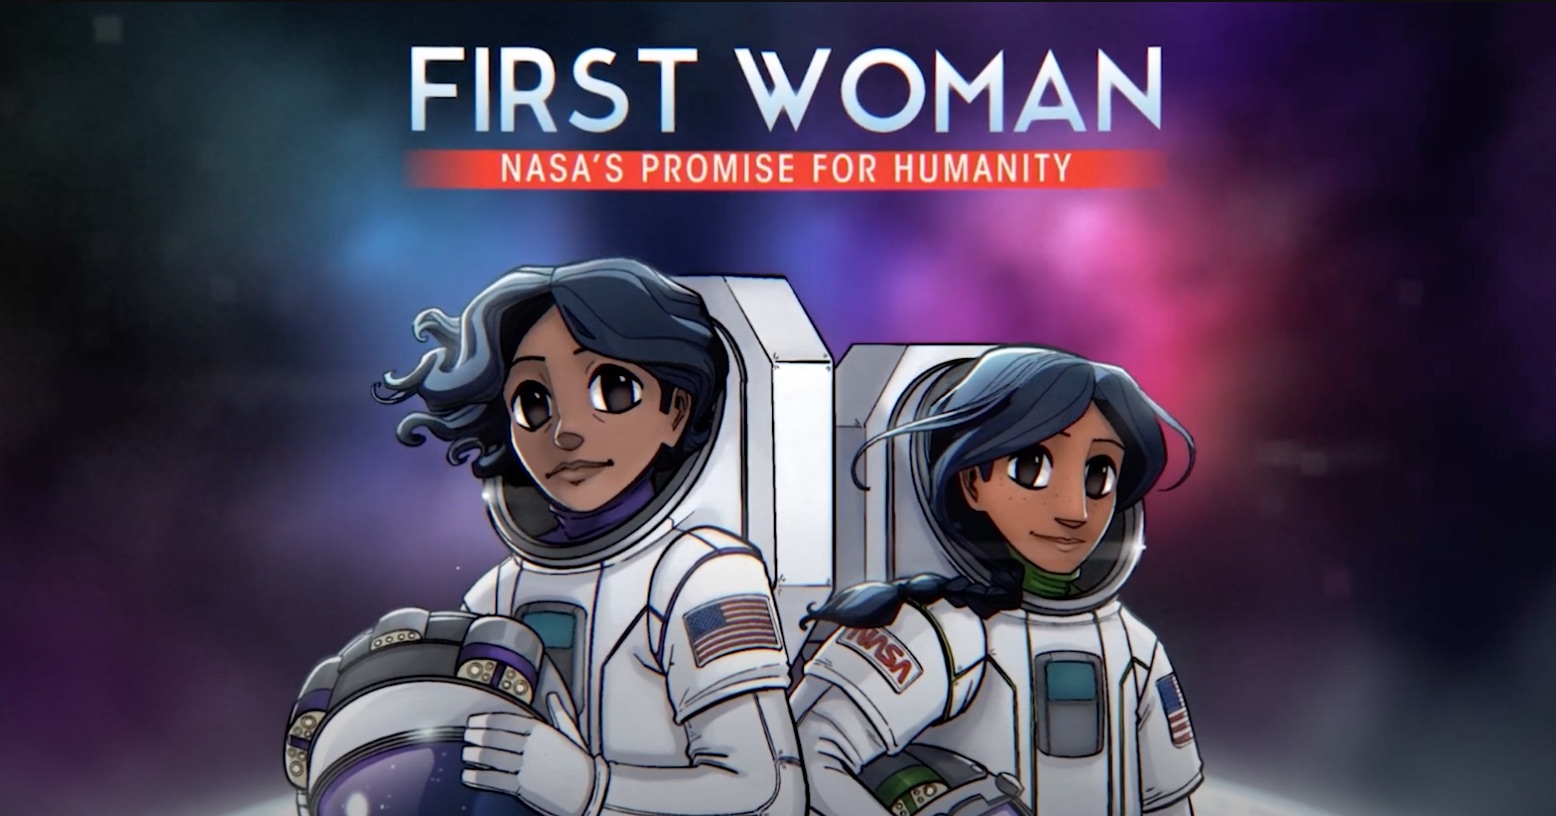 Astronaut Callie Rodriguez helps deploy a lunar telescope in NASA’s new online graphic novel Space